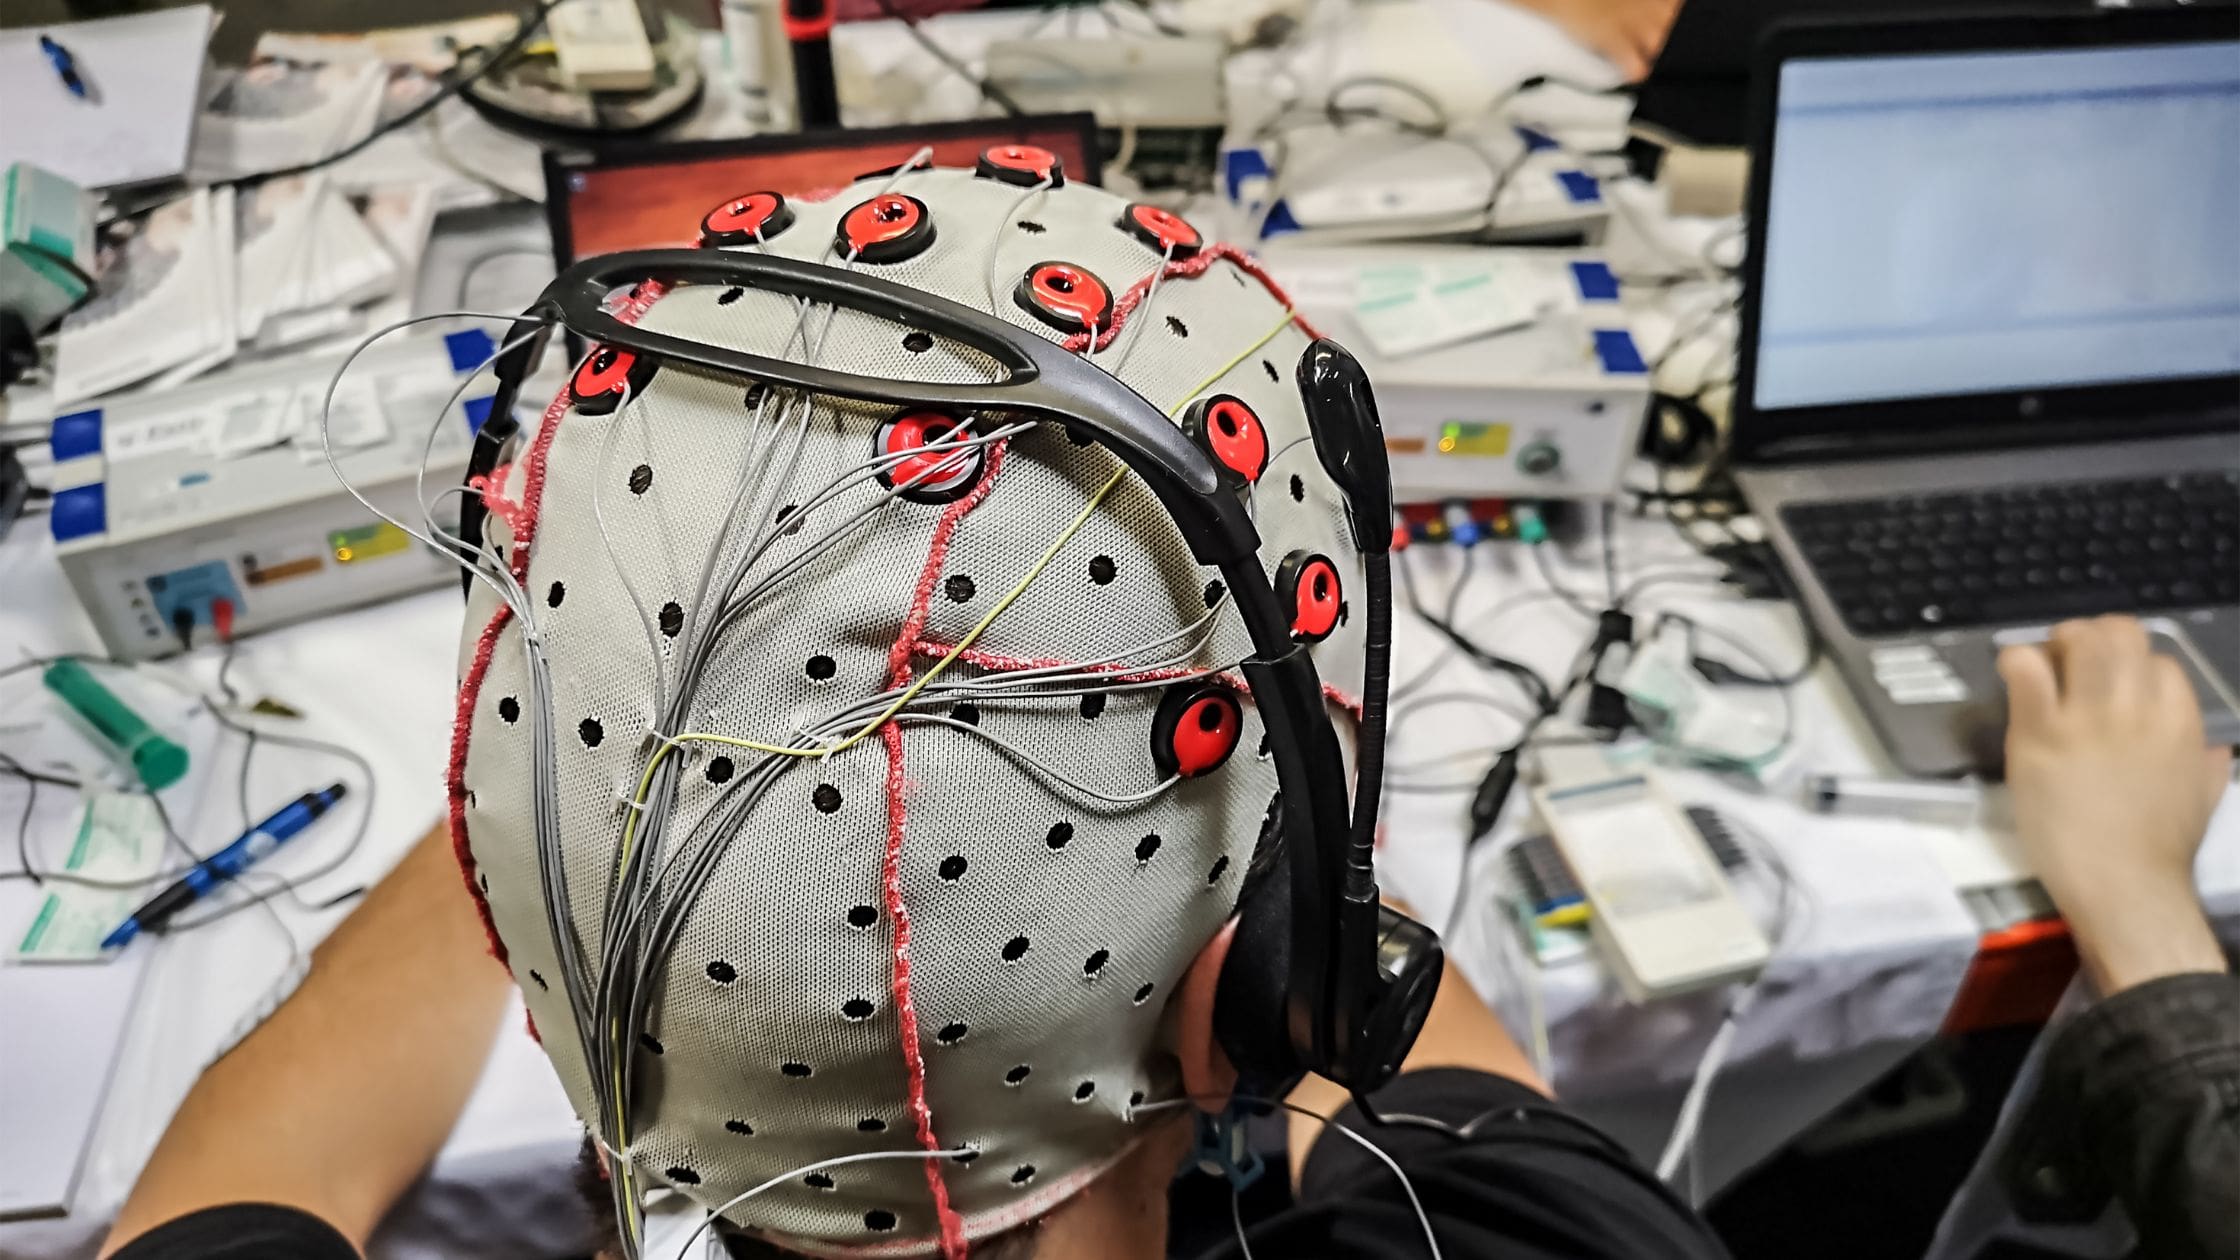 Neurotech: Pioneering Accessibility in Brain-Computer Interface Technology